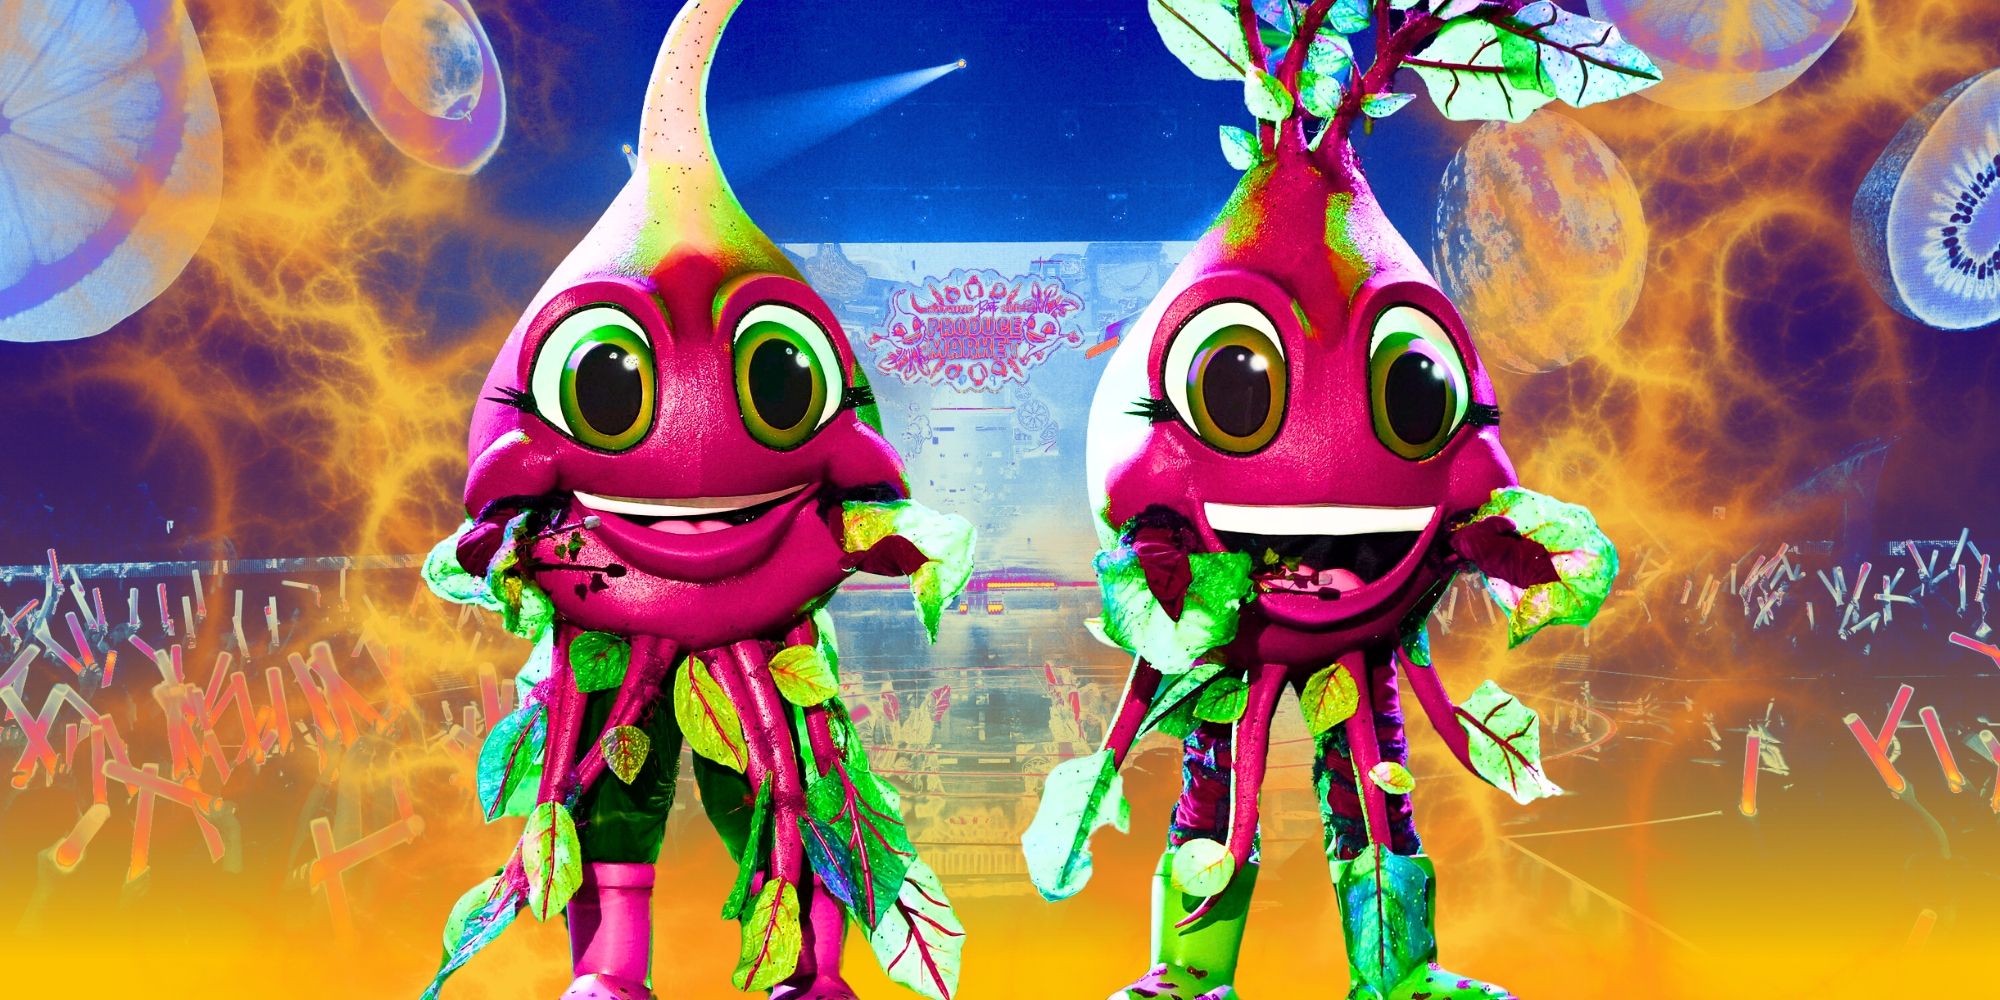 The Masked Singer's Beets standing on stage and holding mics, with orange swirls behind them